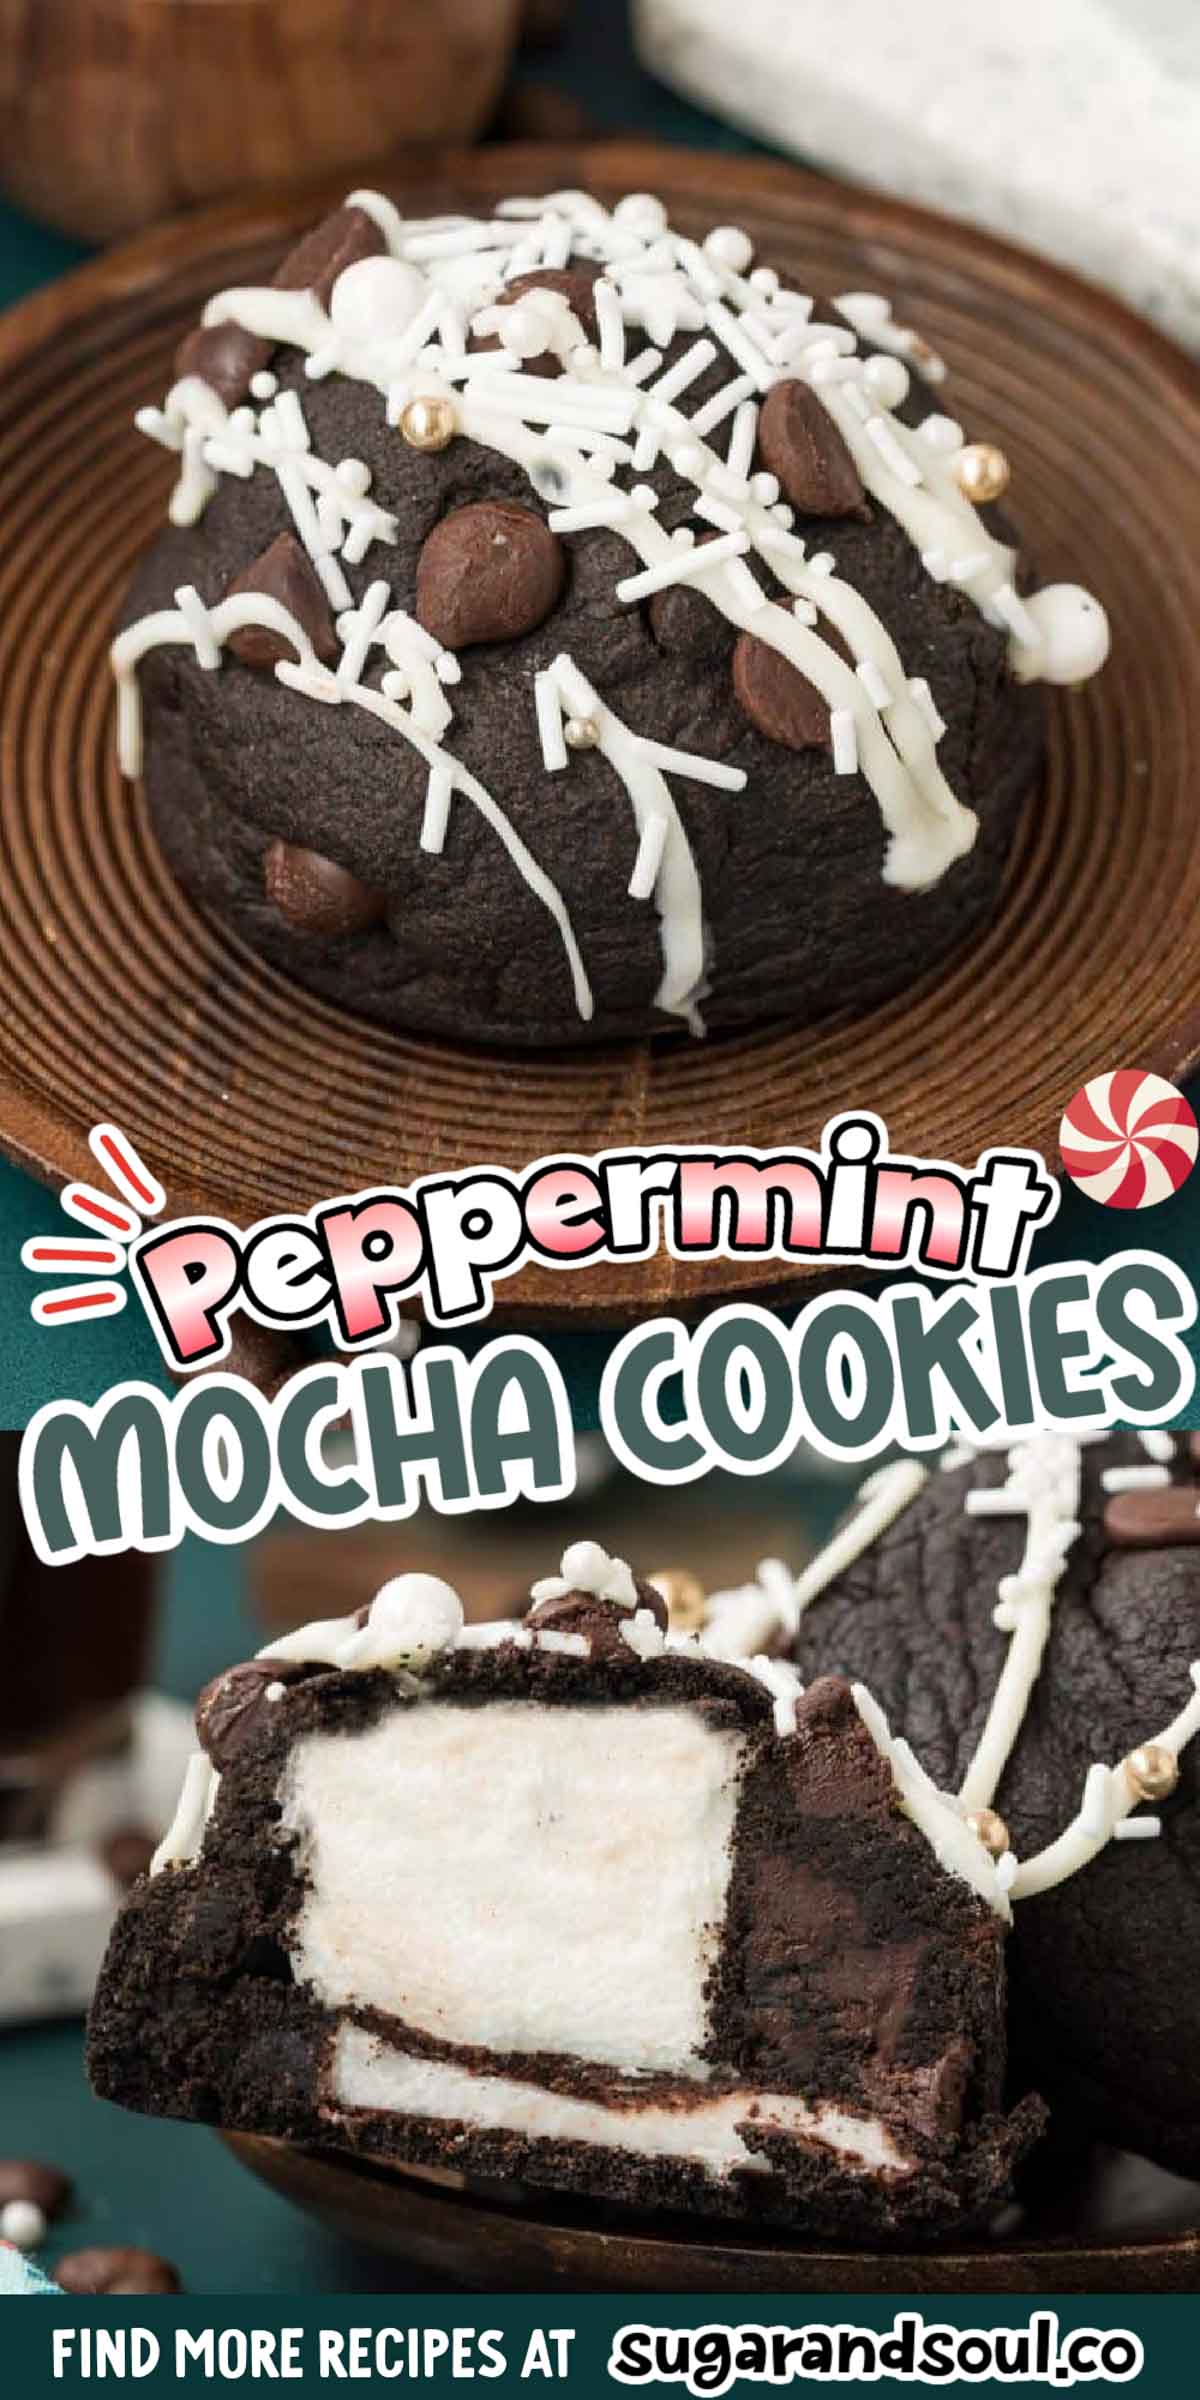 Peppermint Mocha Cookies are made with a deep, coffee-flavored chocolate cookie dough around a peppermint patty that's topped with a marshmallow! A reasonably simple, no-chill, gourmet cookie recipe that will impress friends and family! via @sugarandsoulco